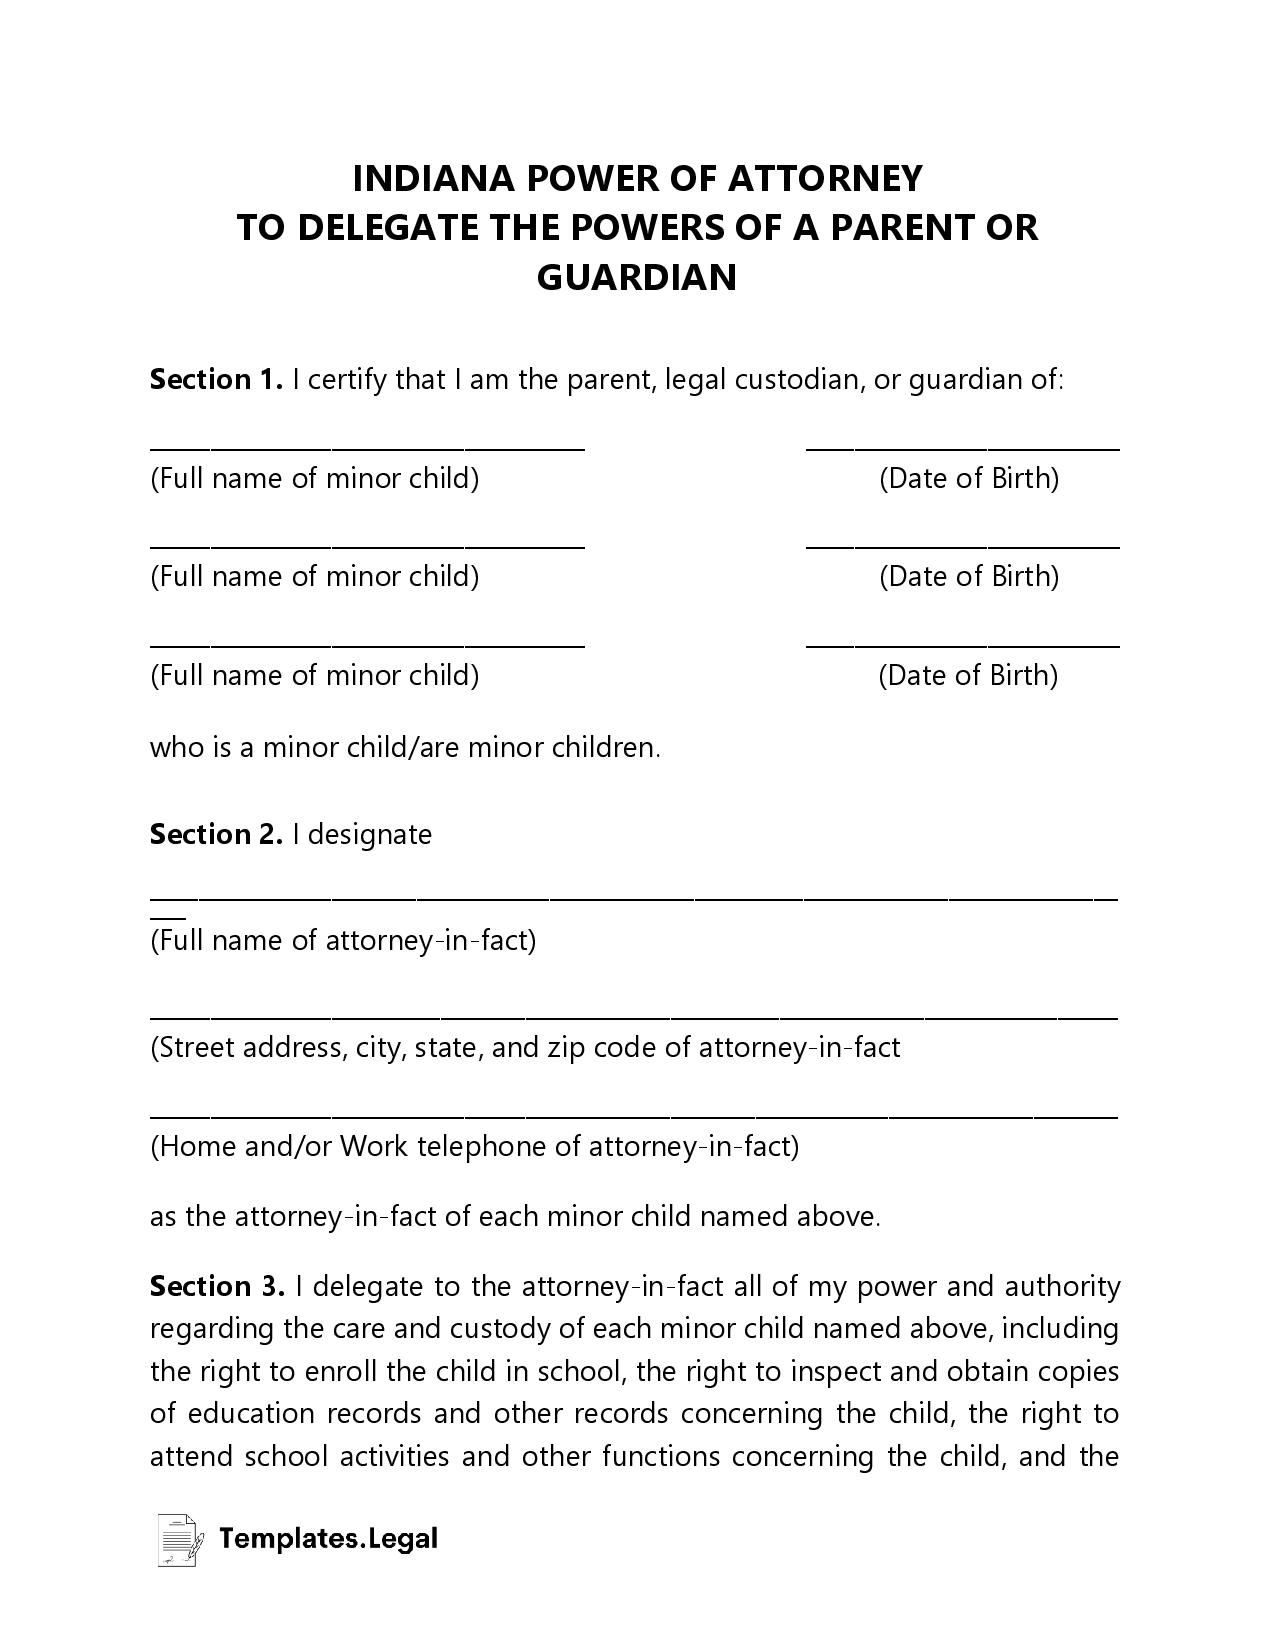 Indiana Minor (Child) Power of Attorney - Templates.Legal